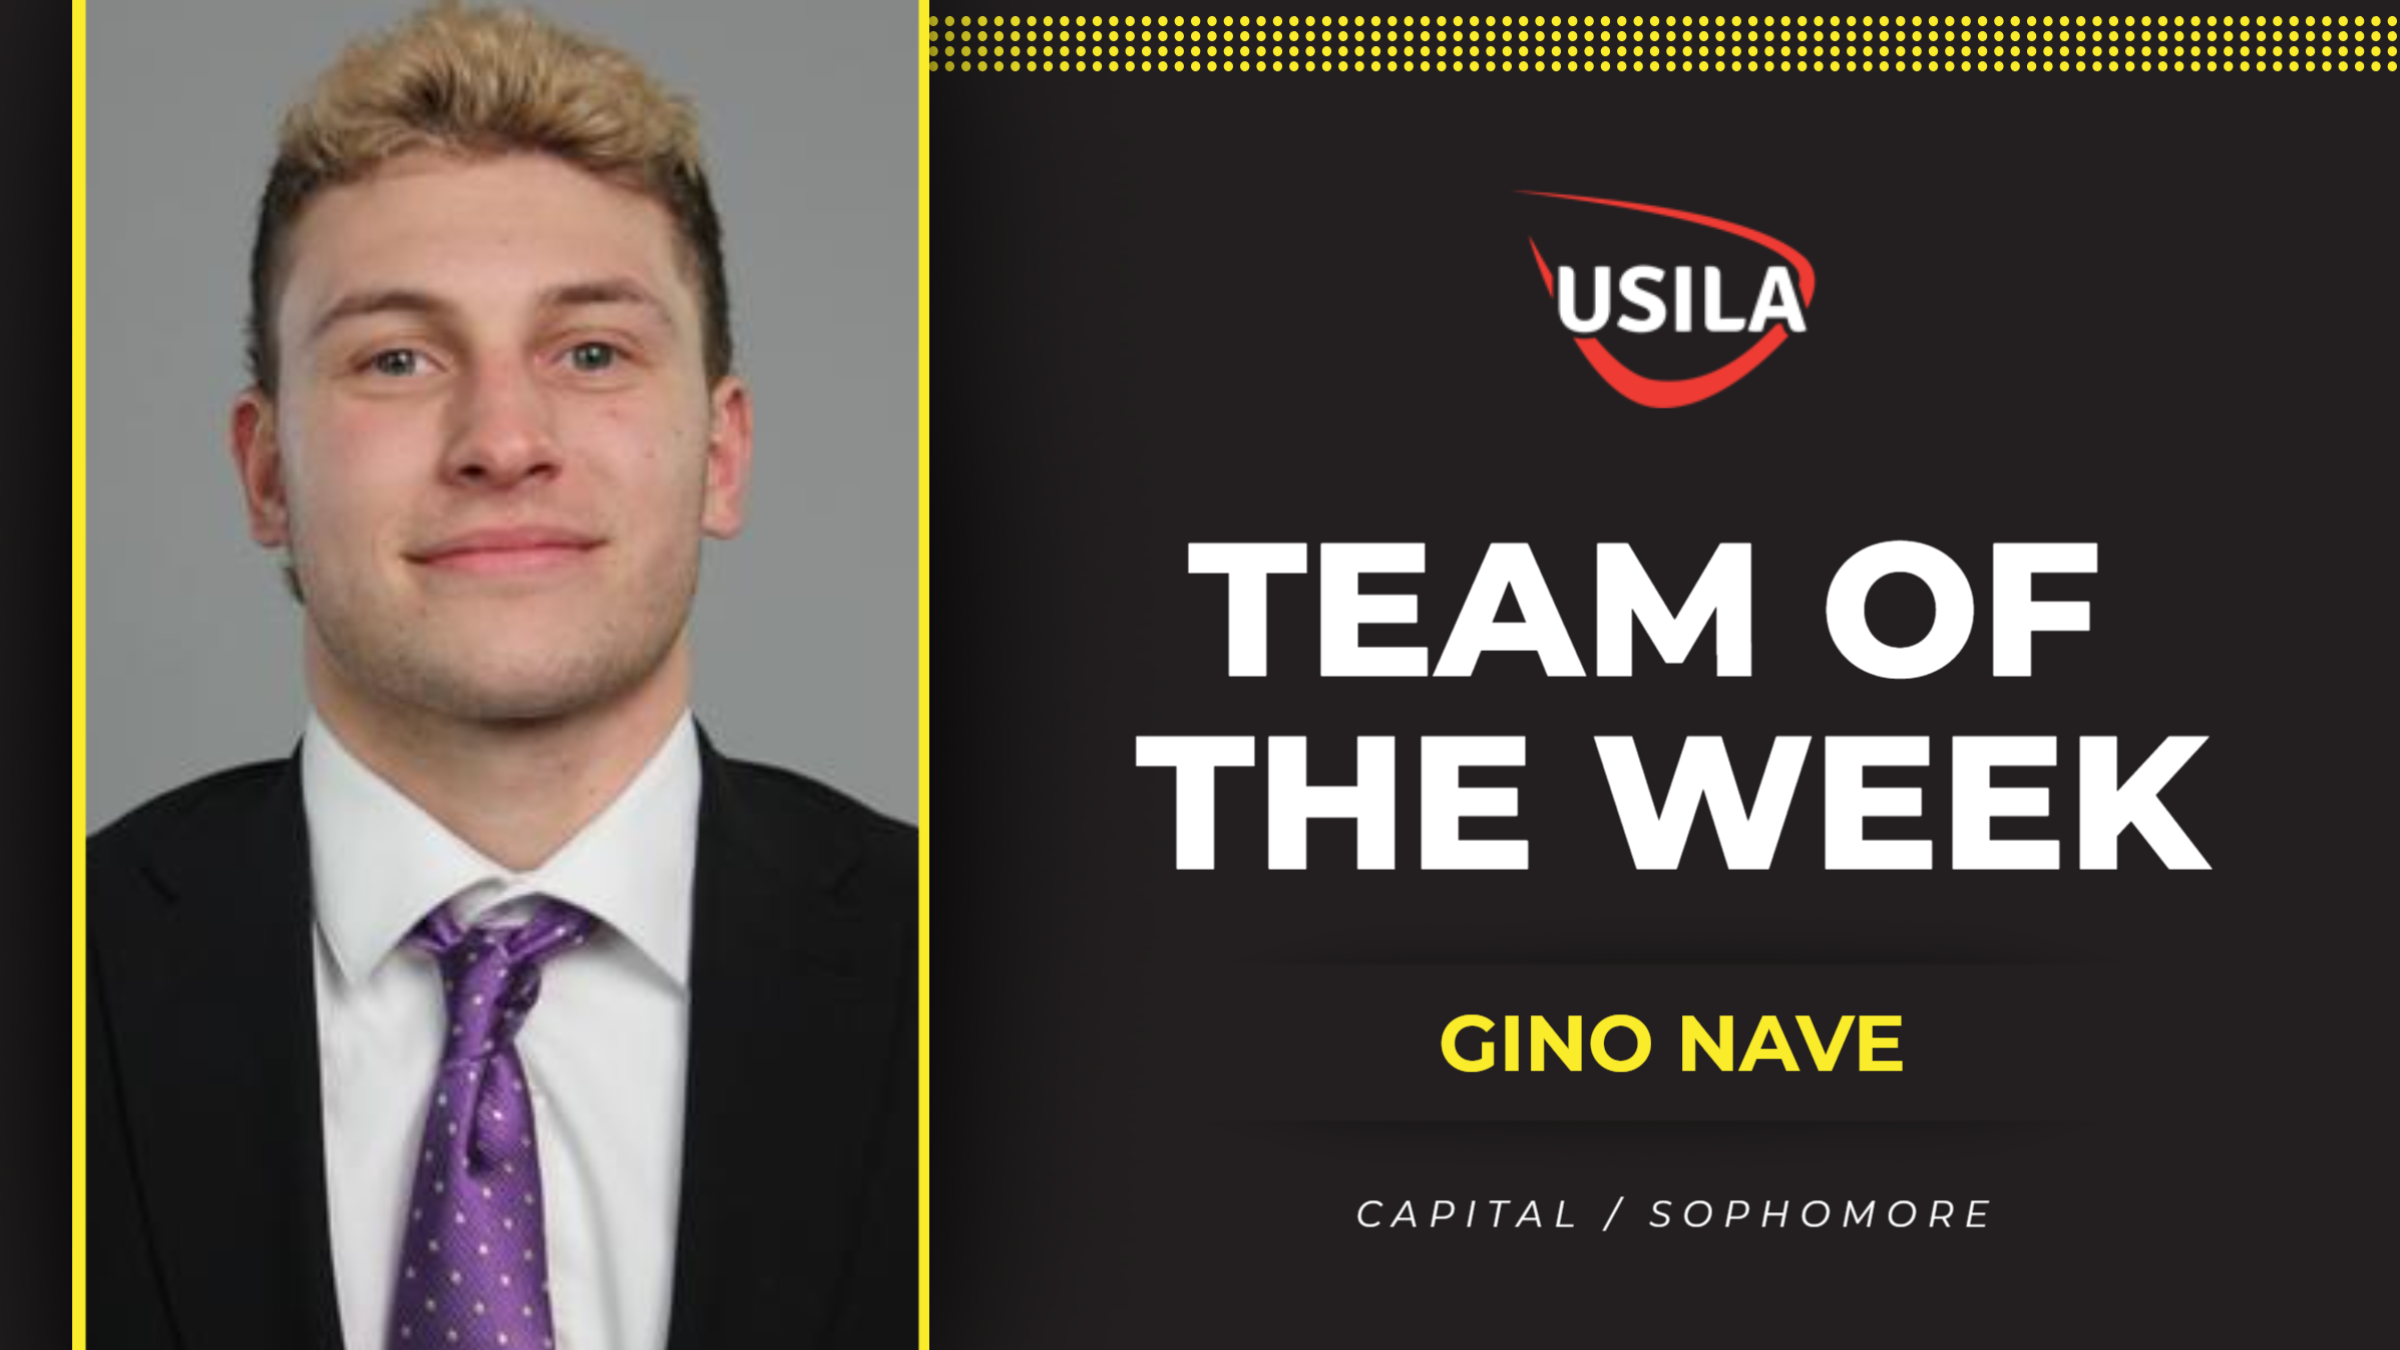 Capital's Gino Nave Selected to USILA Team of the Week